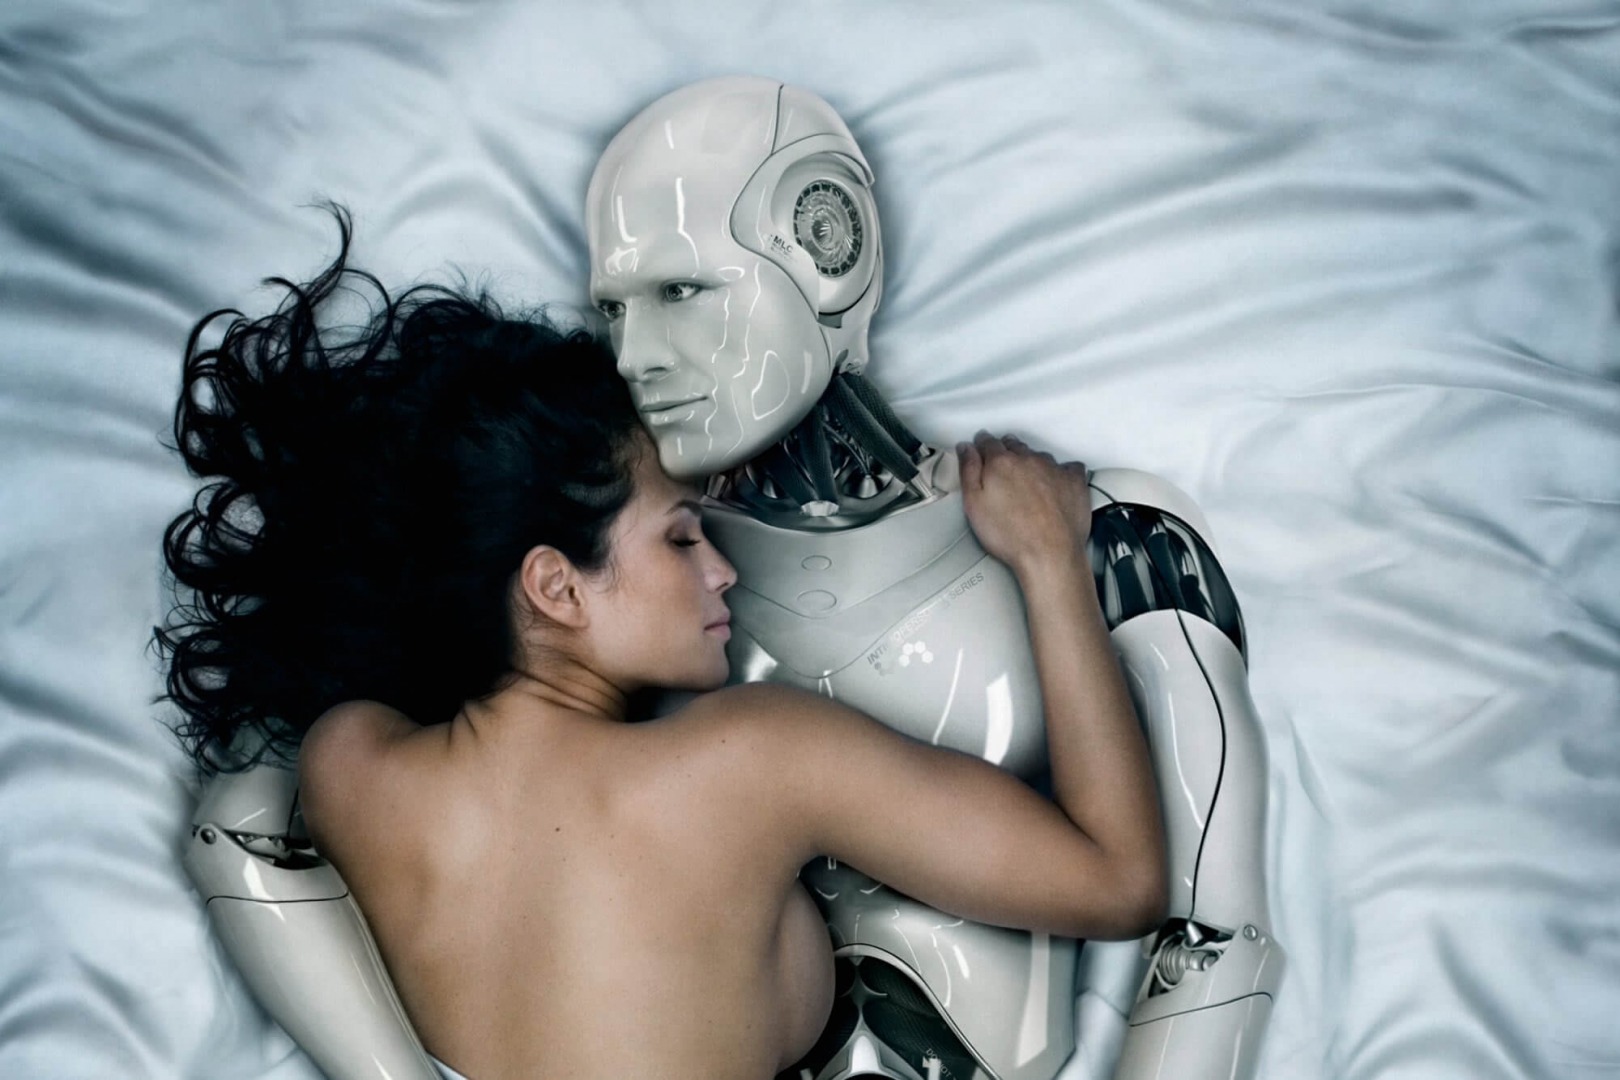 Falling In Love With A Robot: Could A Robot Ever Be Mistaken For A Human?